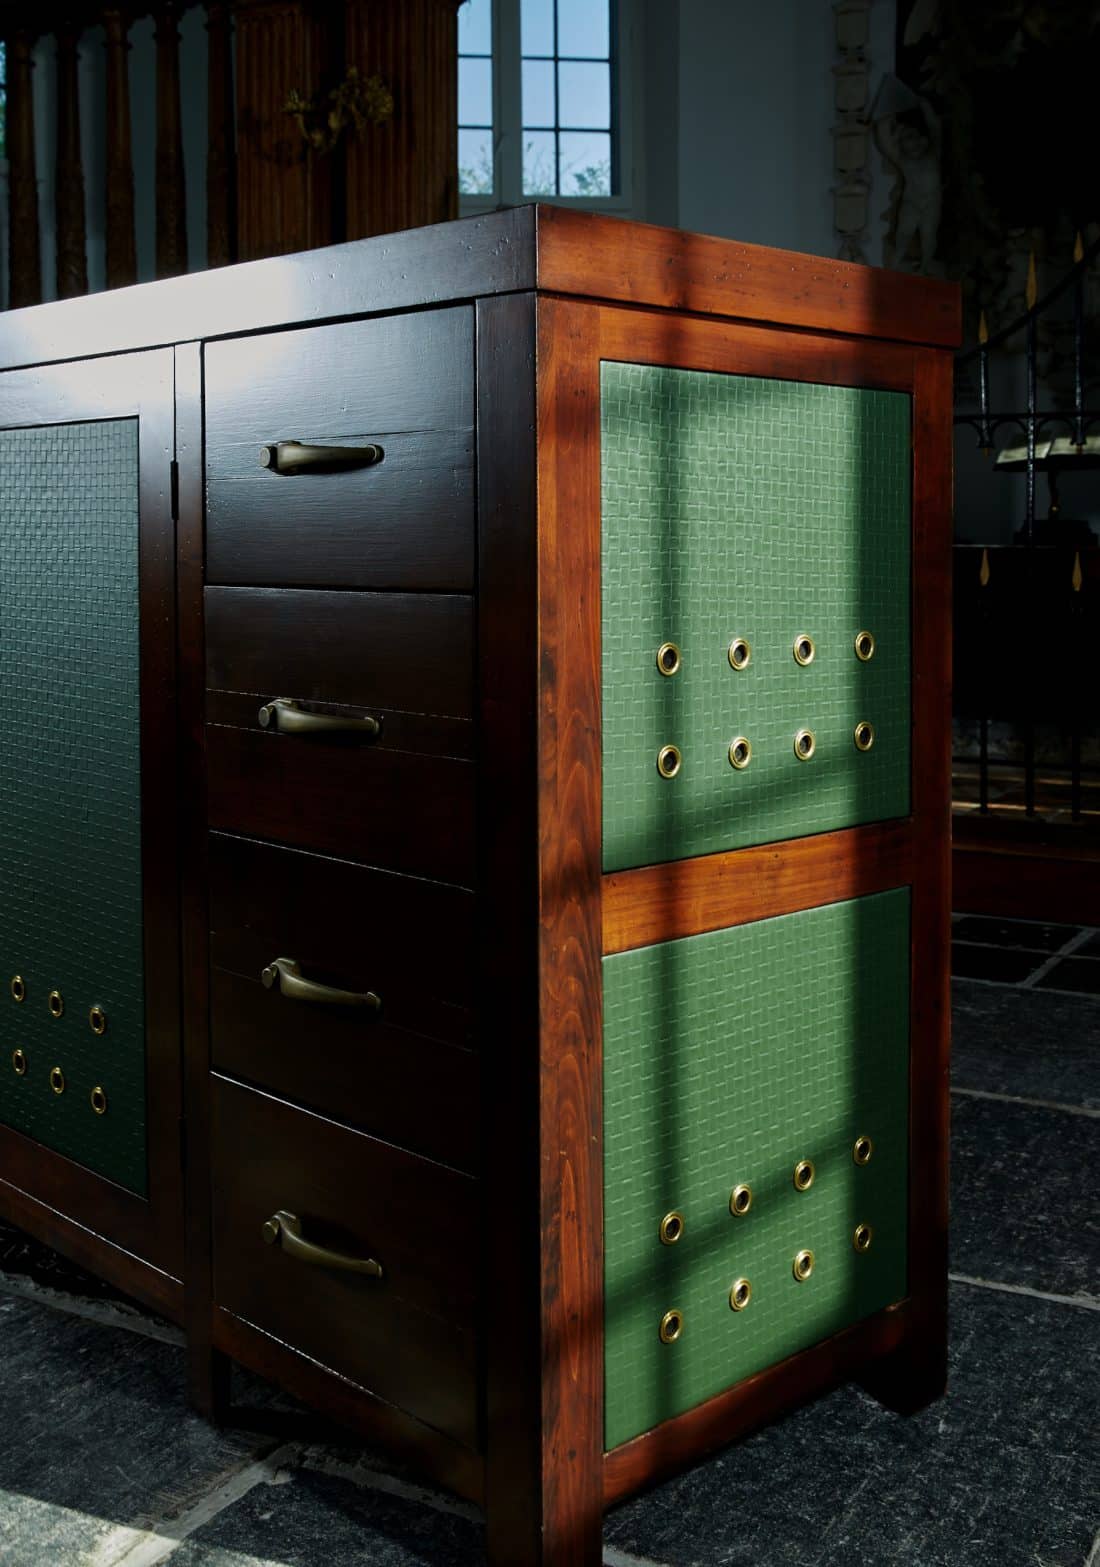 Trp Post Container Data Trp Post Id 10571 Classic Porsche Buffet Cabinet Royal Forest Green Trp Post Container